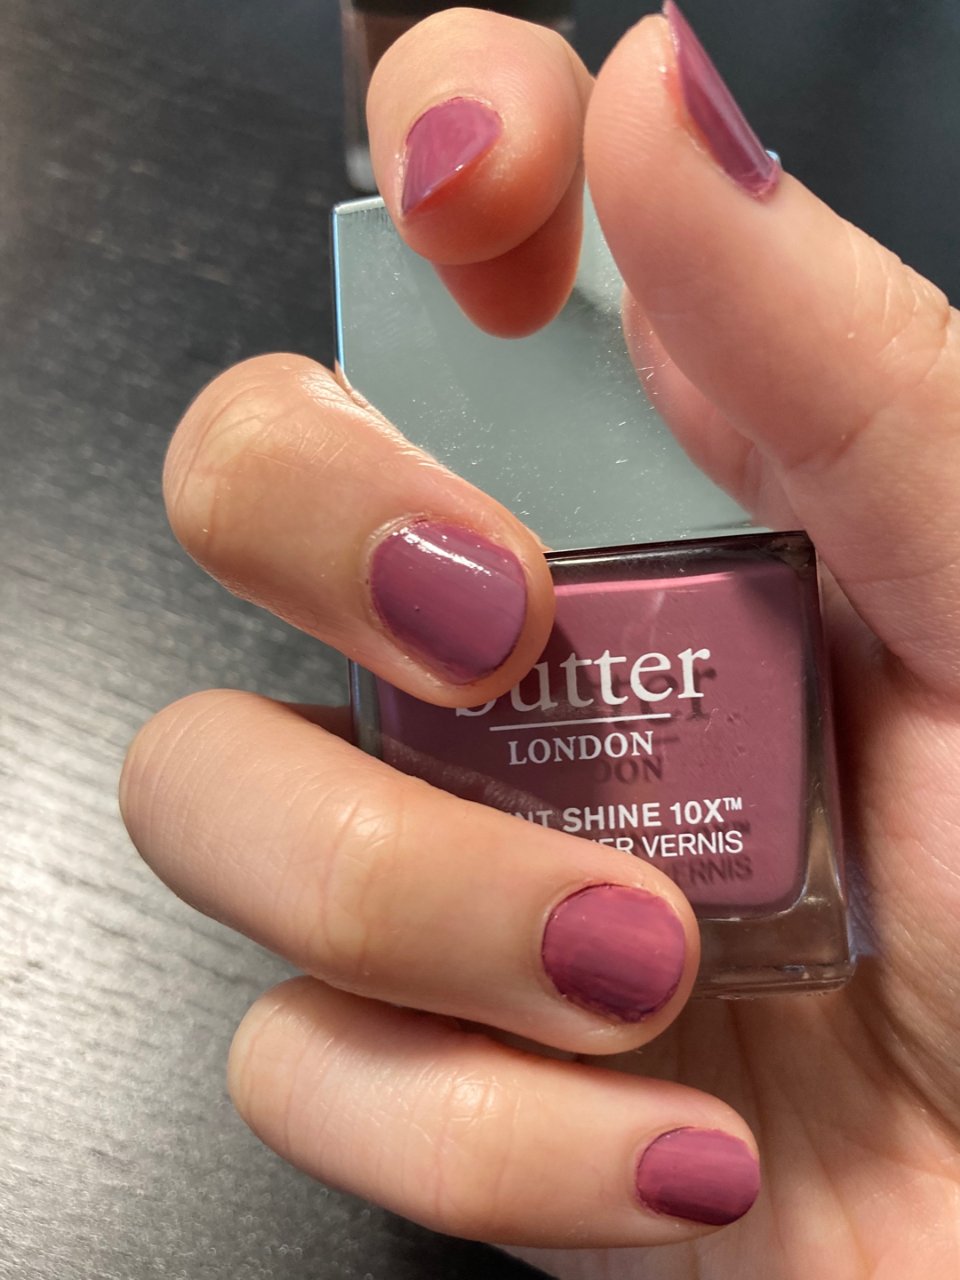 Butter London Toff指甲...